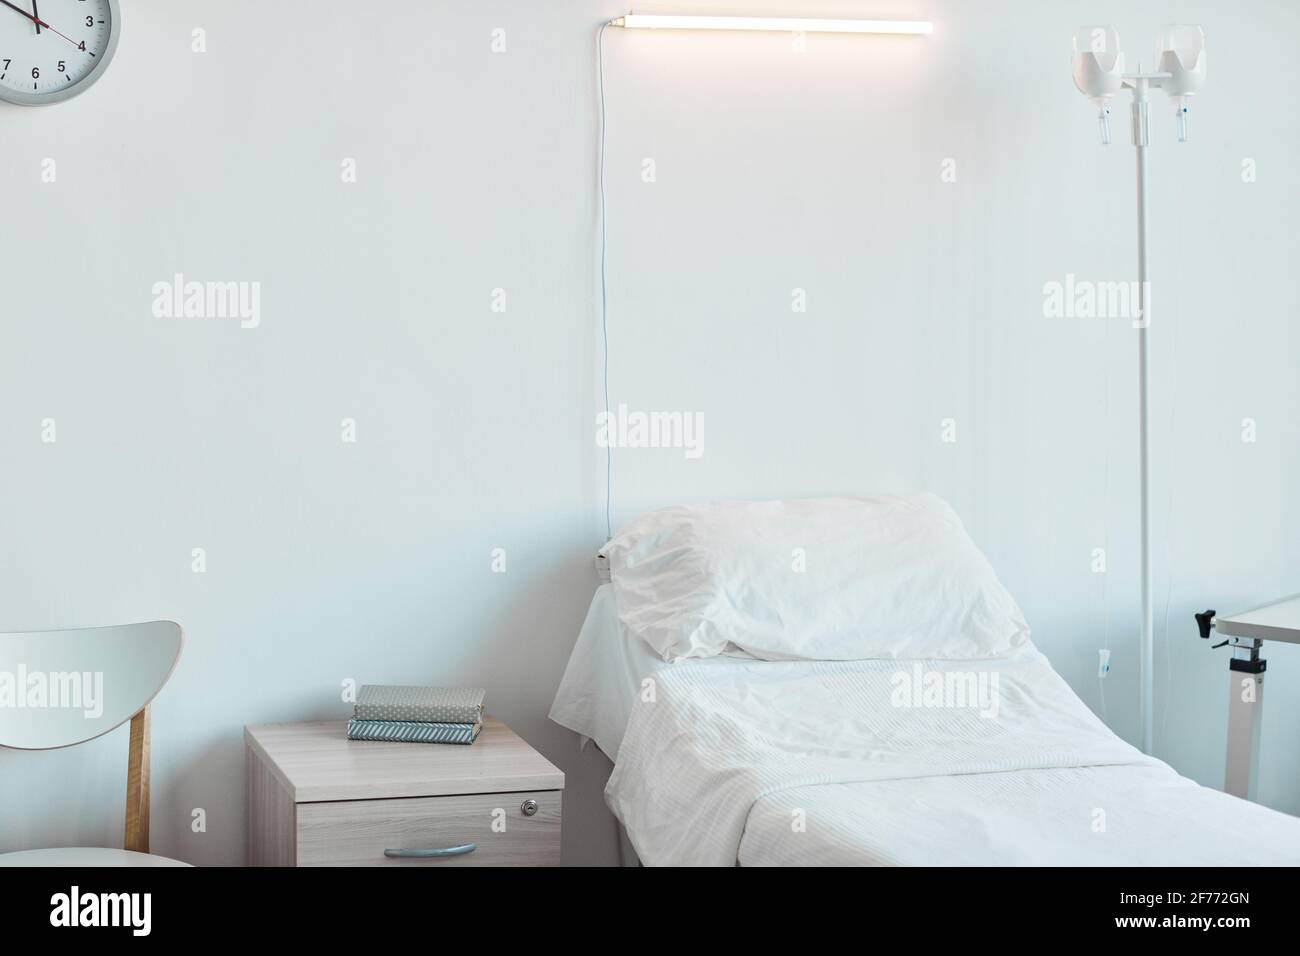 Haloton Hospital In A Hospital Building With A Bed And A Monitor Background  Hospital Snapchat Picture Background Image And Wallpaper for Free Download